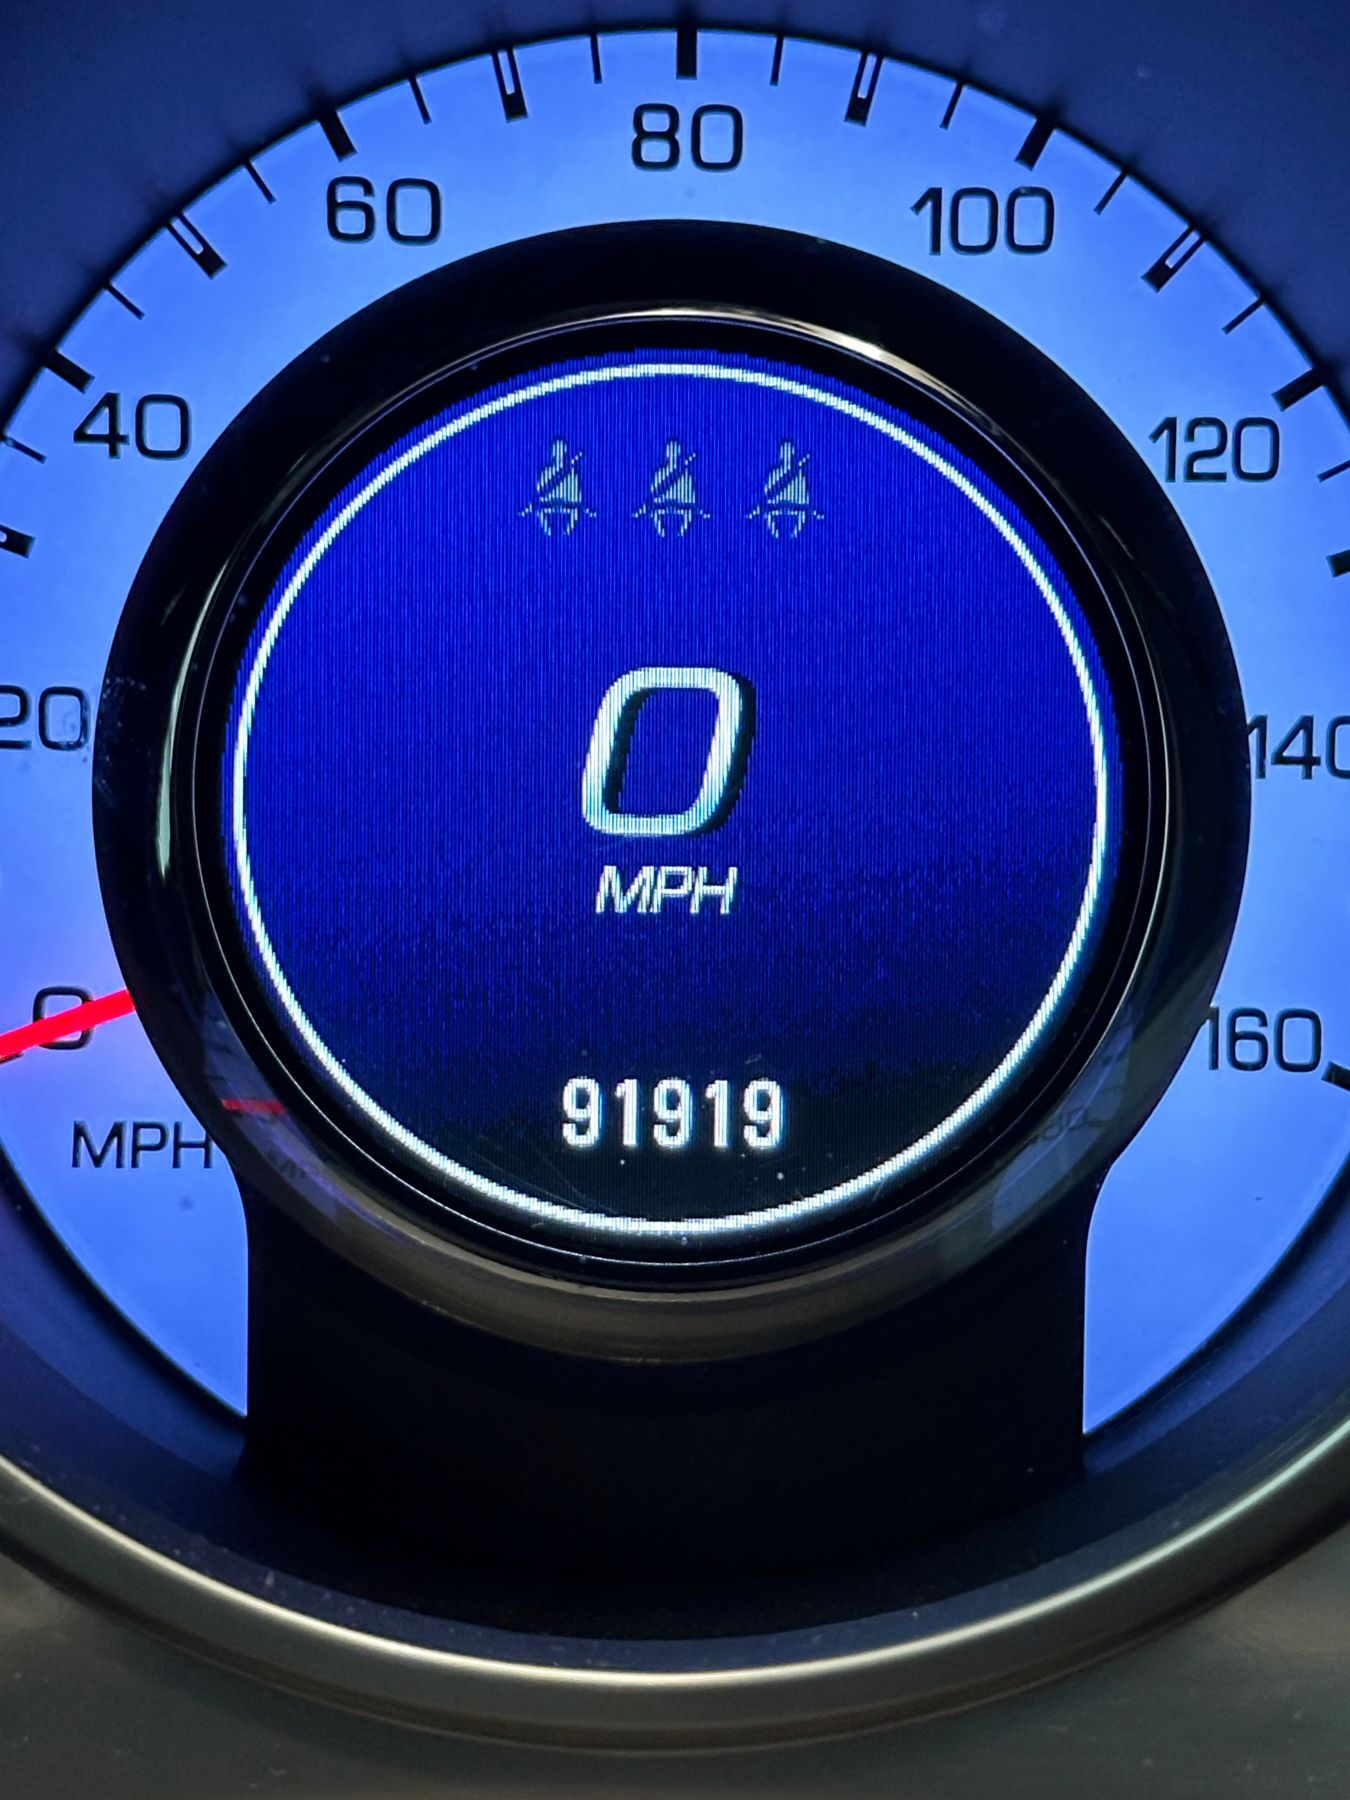 Vehicle speedometer and odometer reading 91,919 miles with a digital display also showing a warning for icy conditions, indicated by three snowflake symbols.